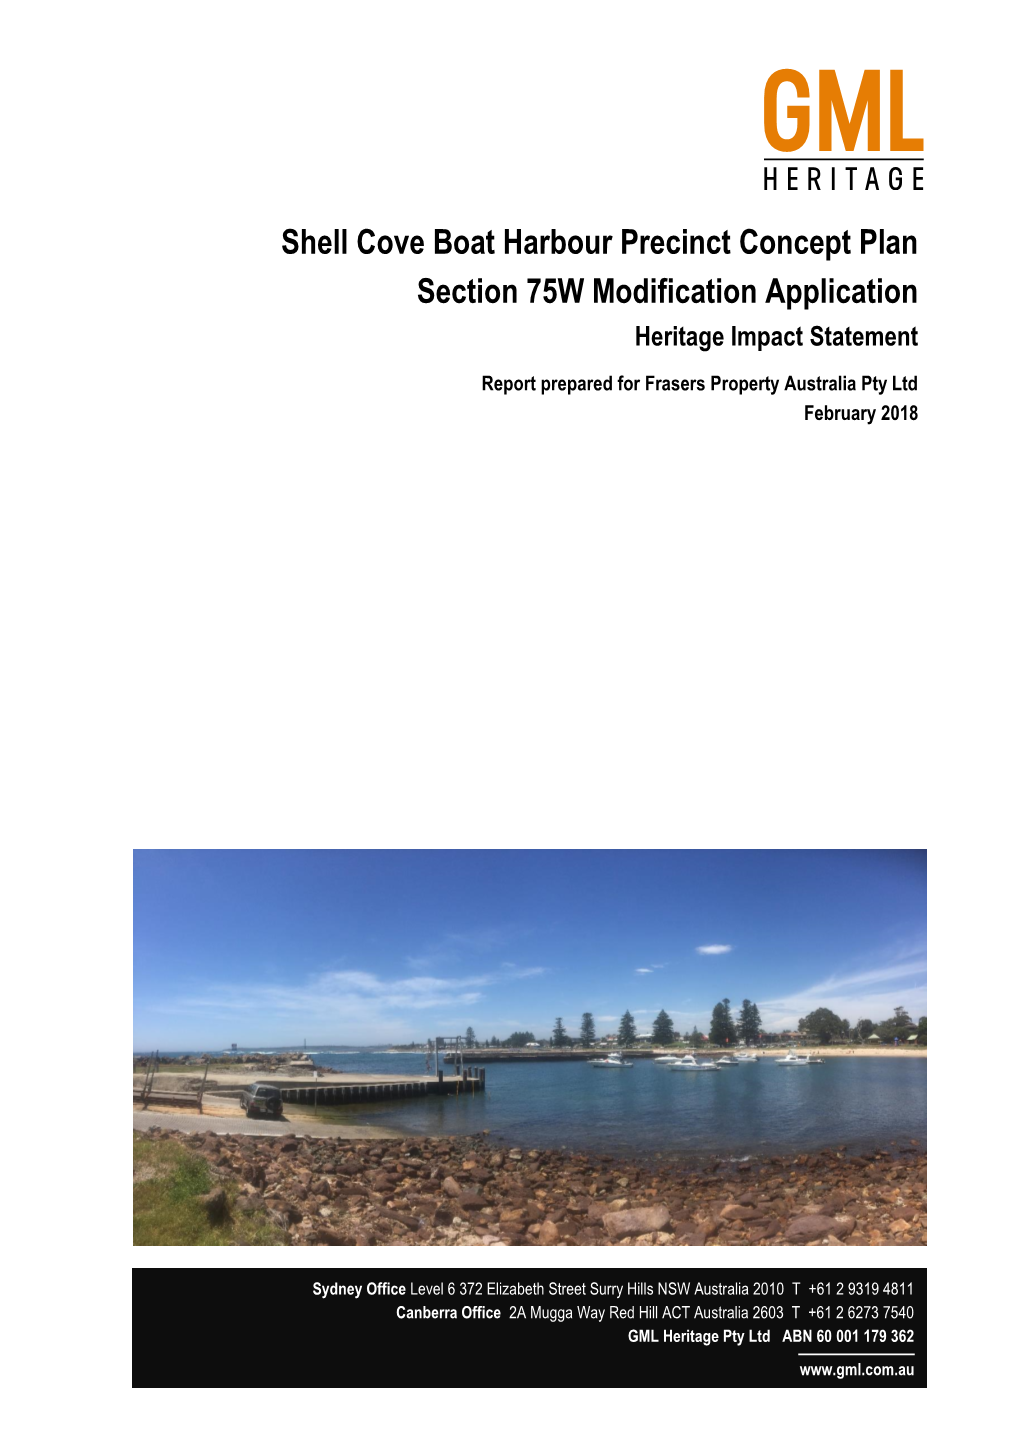 Shell Cove Boat Harbour Precinct Concept Plan Section 75W Modification Application Heritage Impact Statement